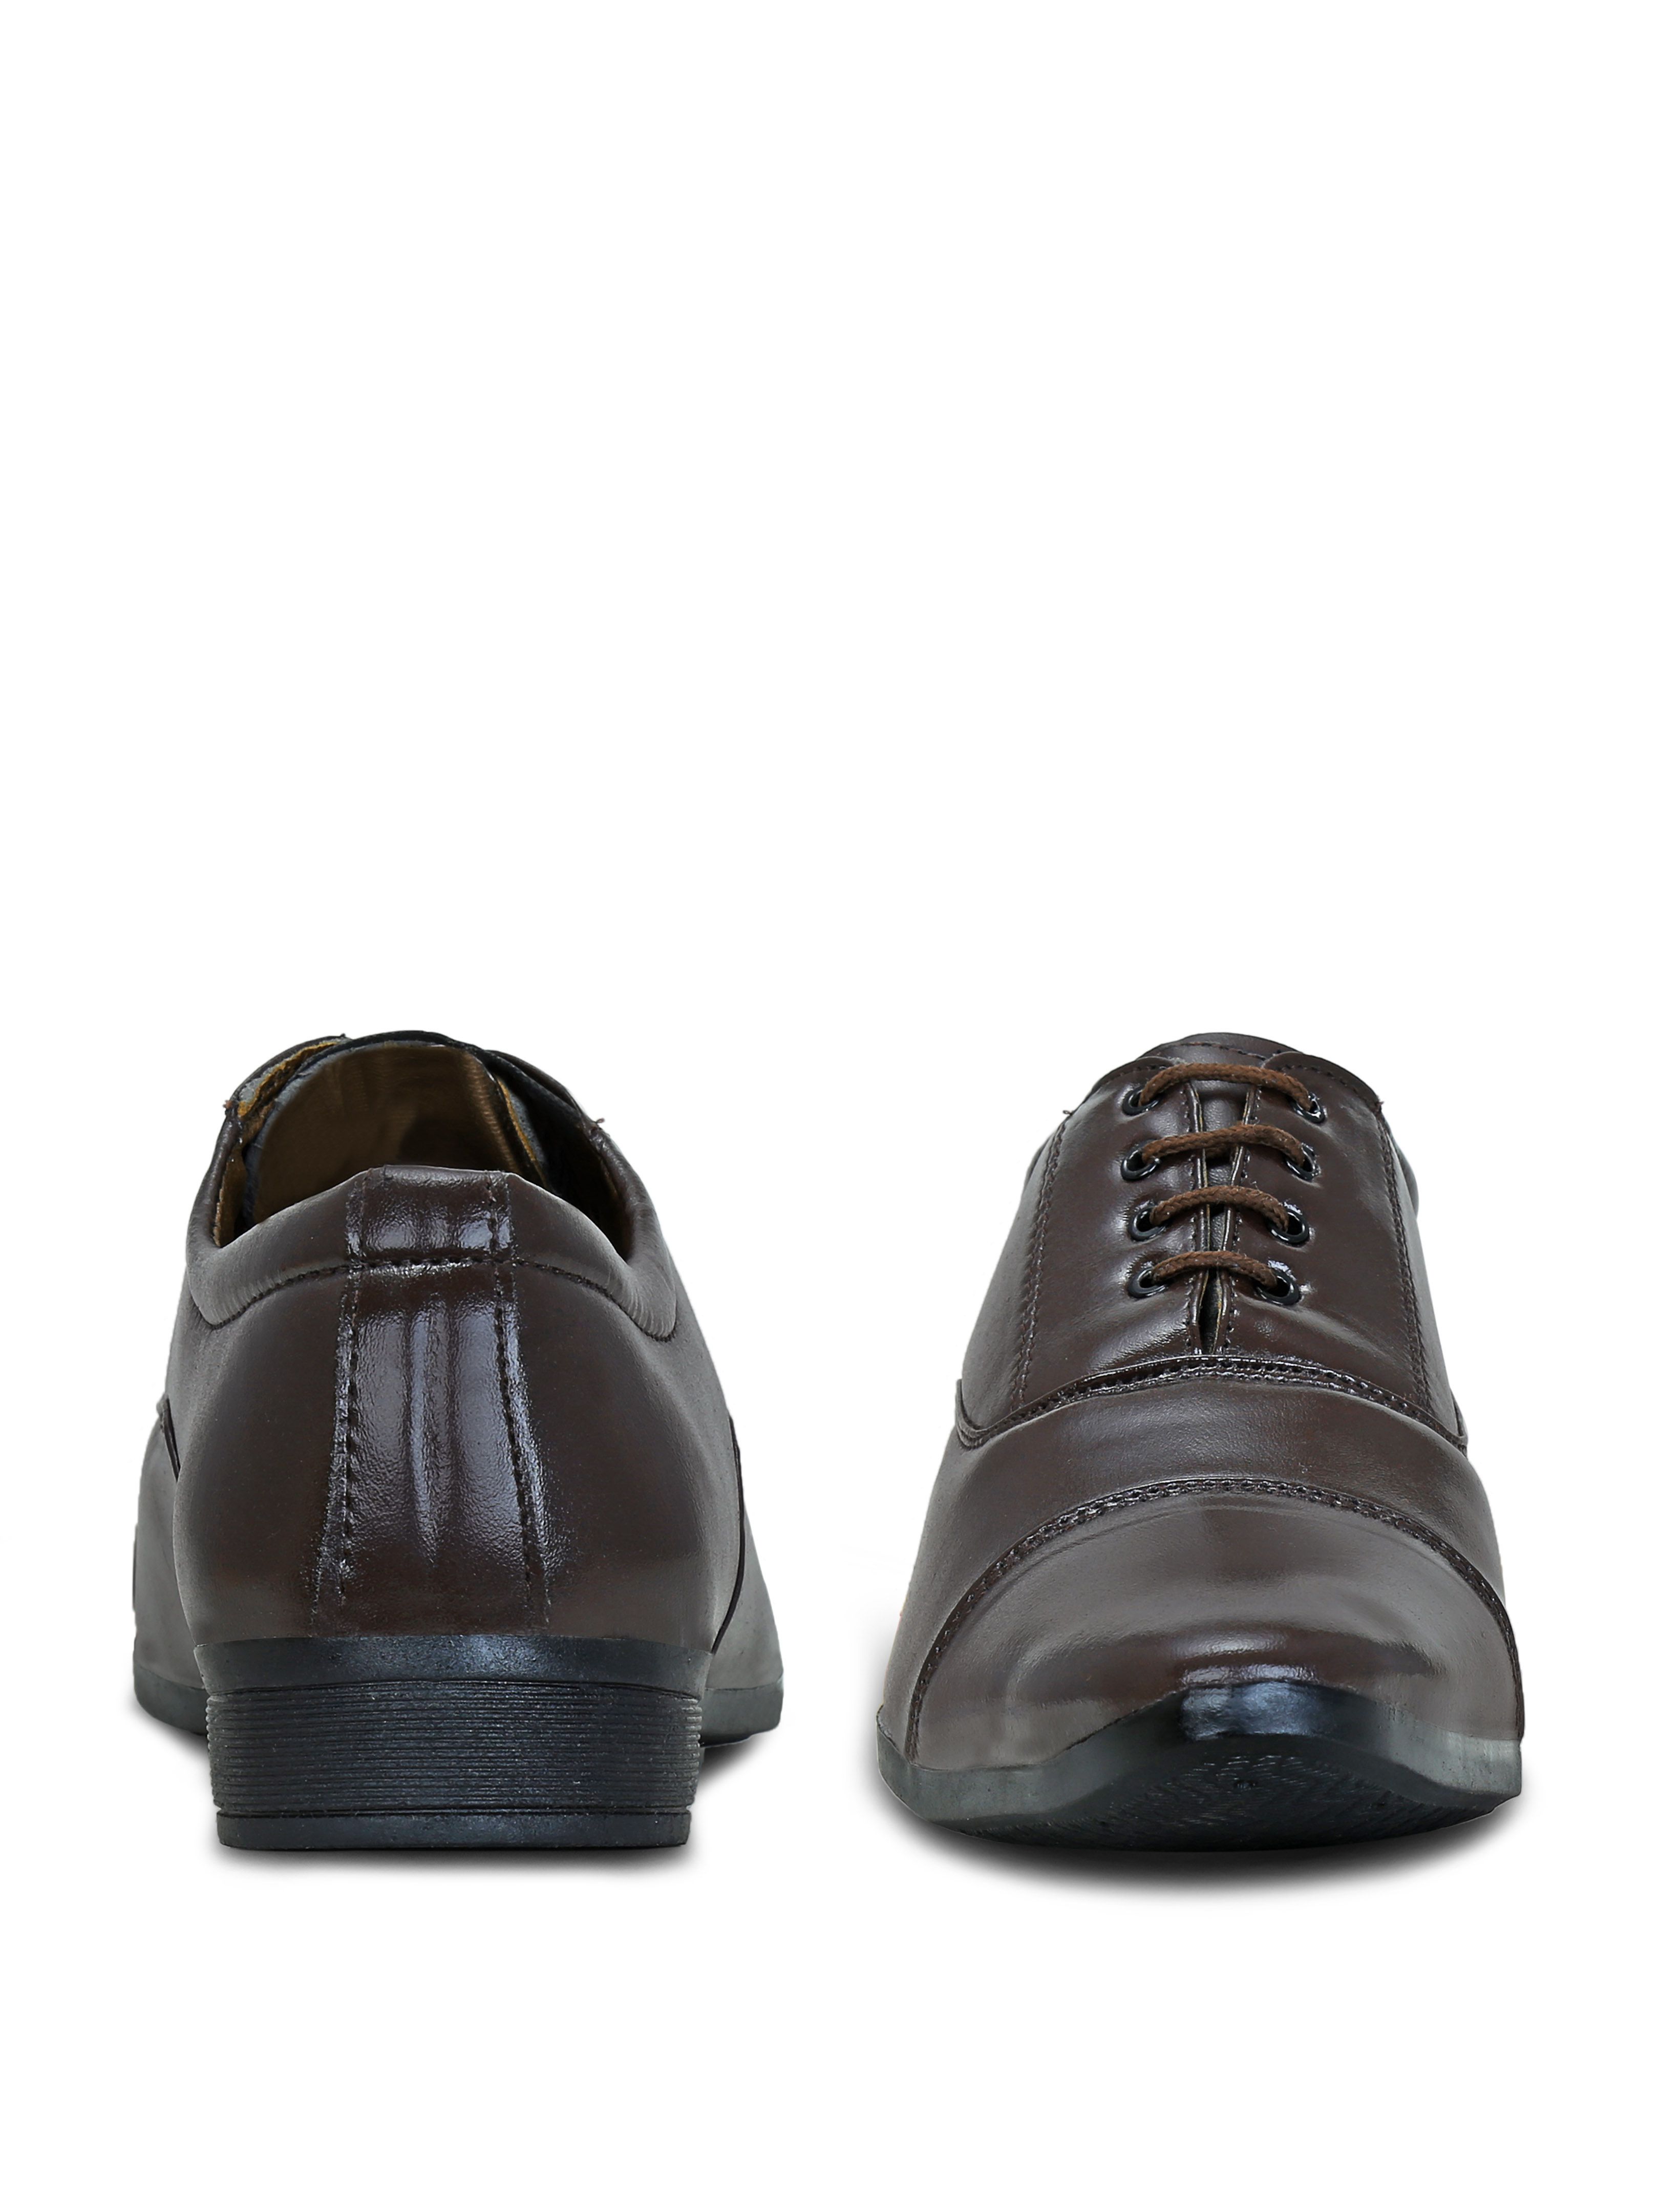 Get Glamr Oxfords Non-Leather Brown Formal Shoes Price in India- Buy ...